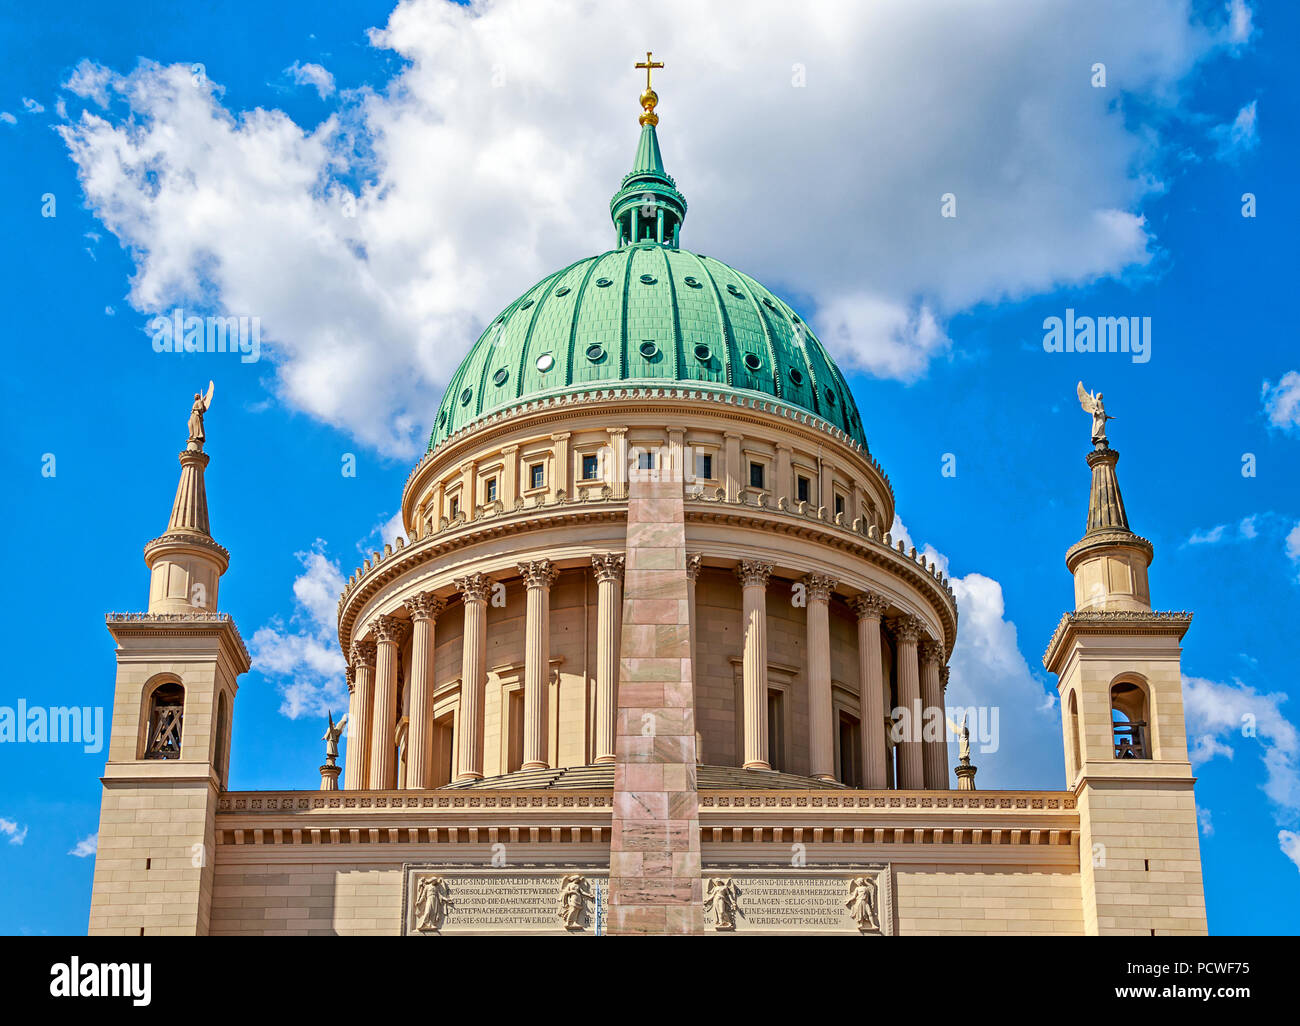 The St. Nikolaikirche on the Alter Markt in the heart of the city of Potsdam, Germany Stock Photo